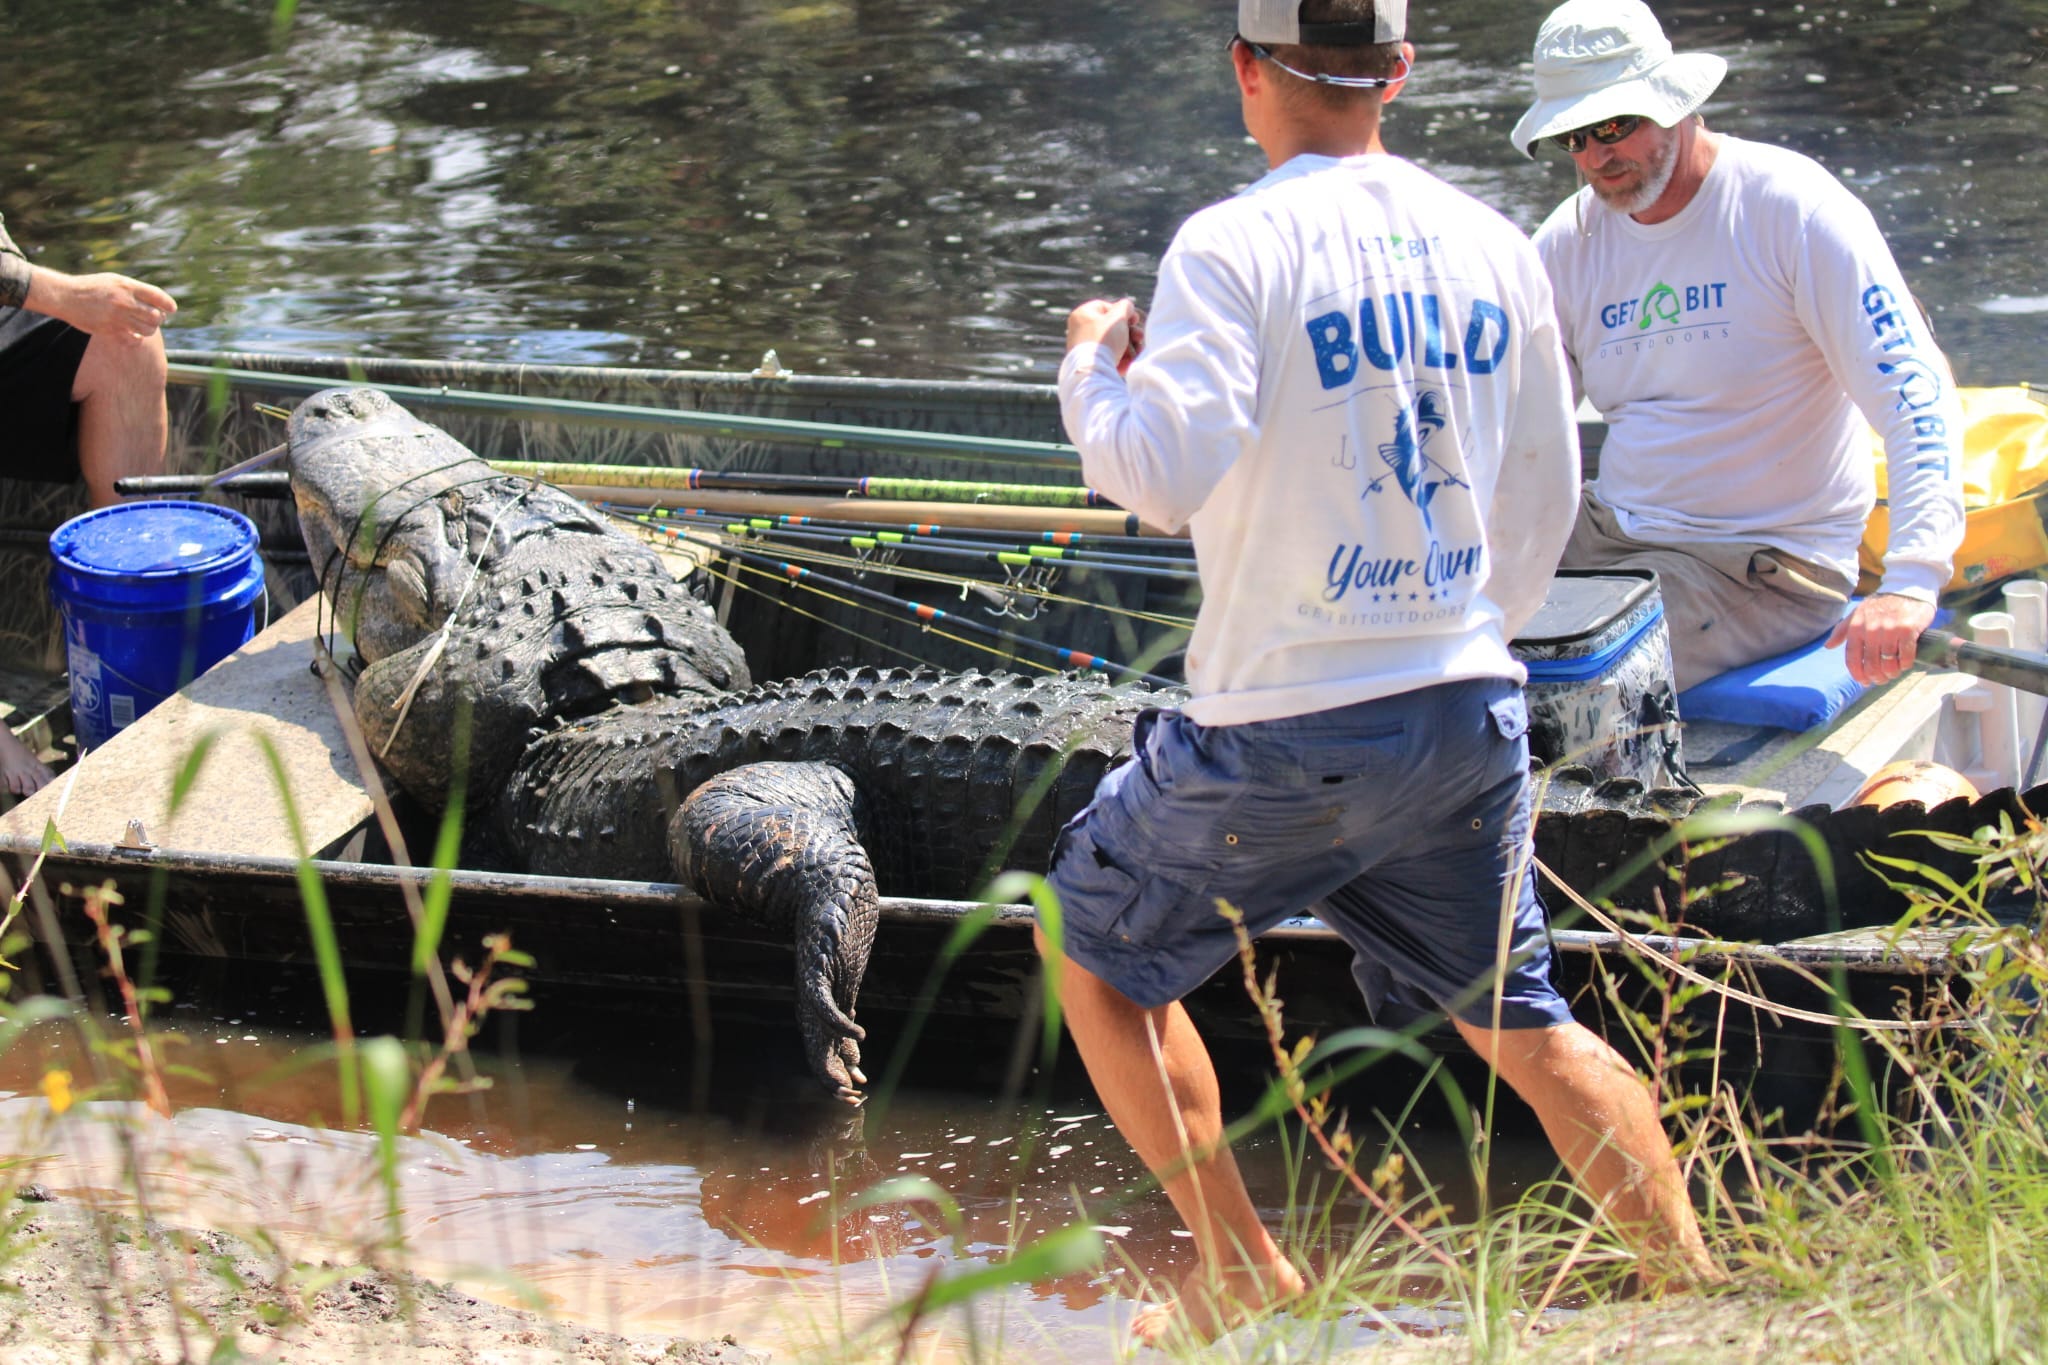 Photos Show 920 Pound Alligator Caught In Florida After 4 Hour Struggle